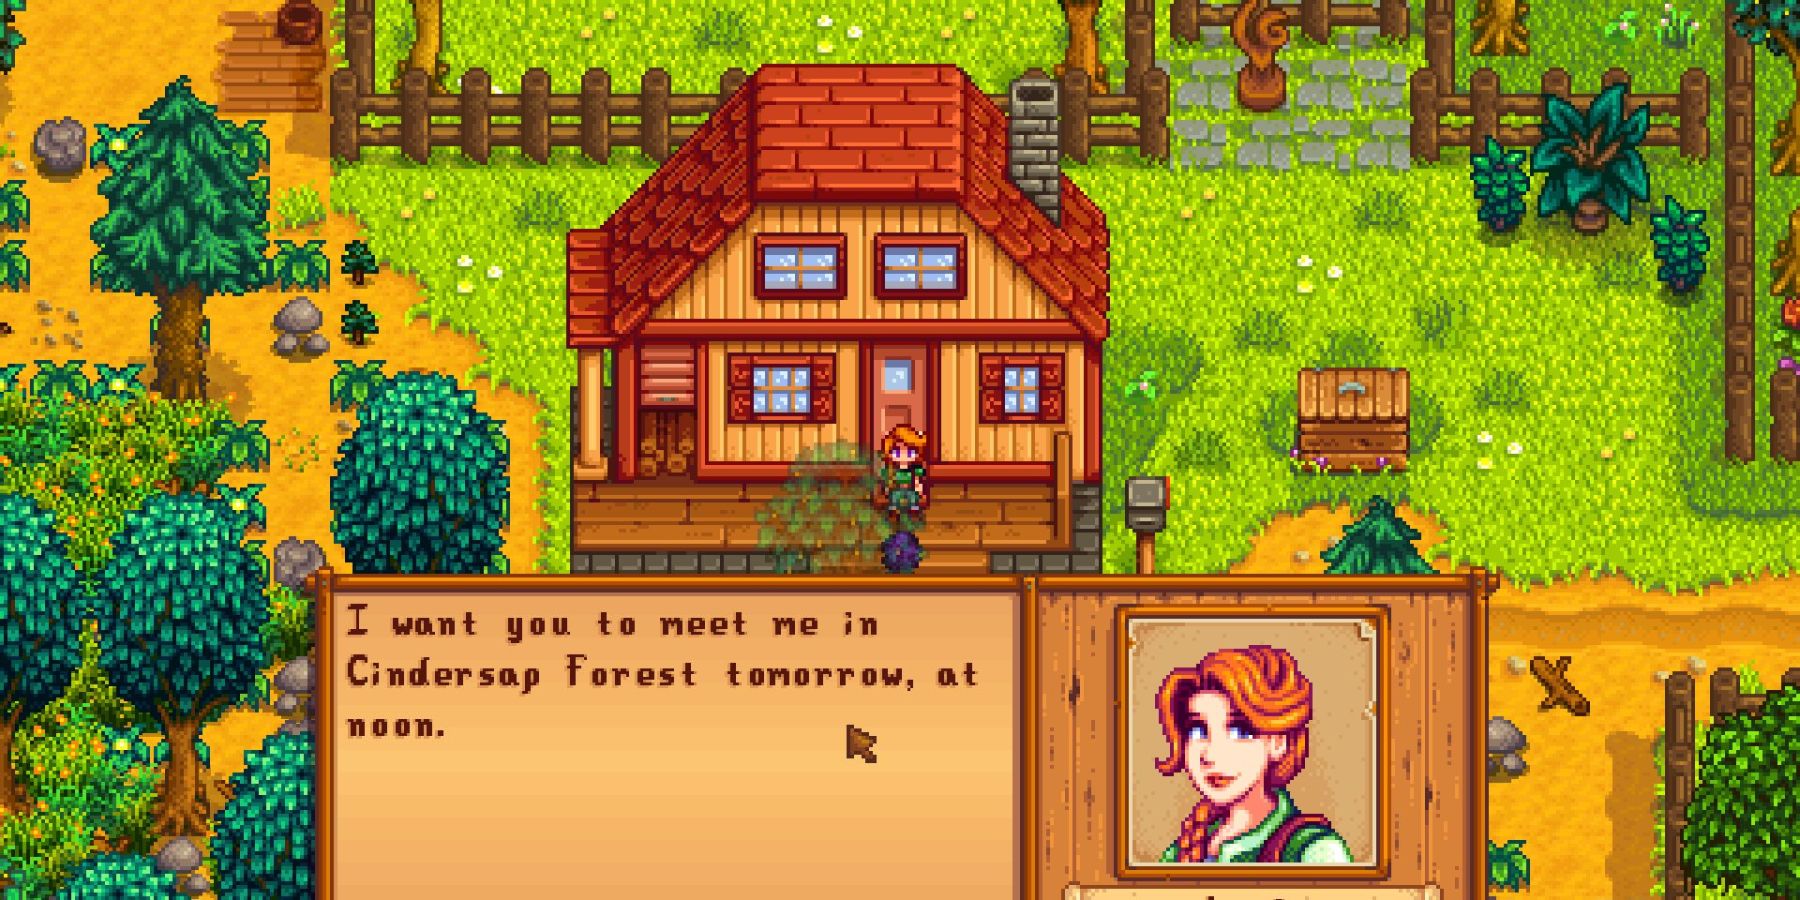 where can i find leah in stardew valley